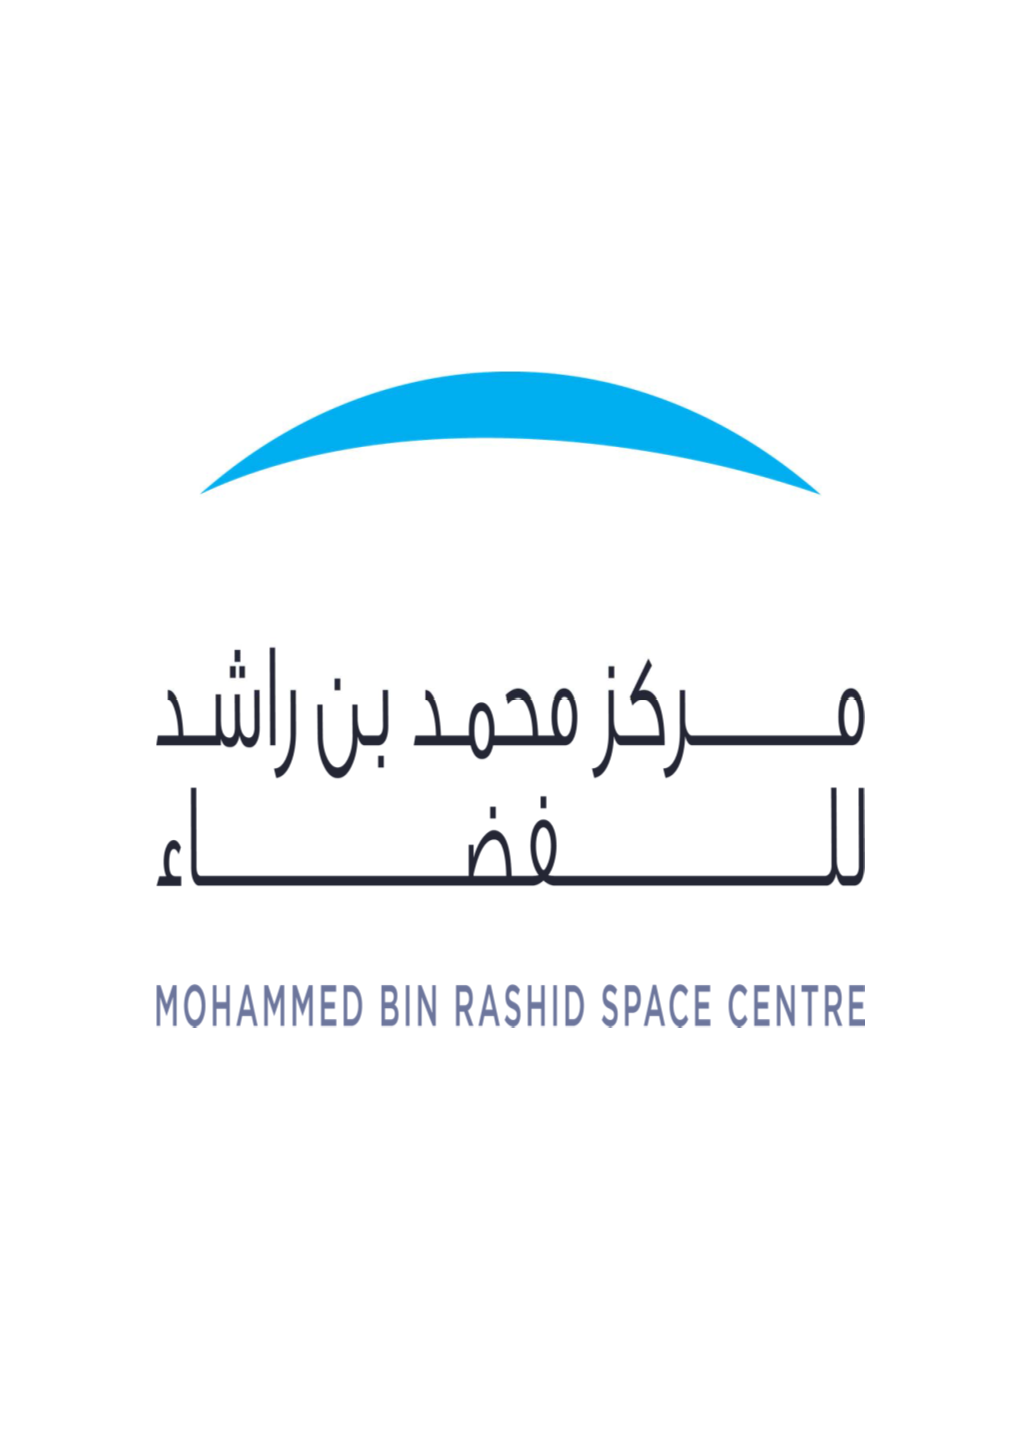 Mbrsc.Ae Introduction to MBRSC